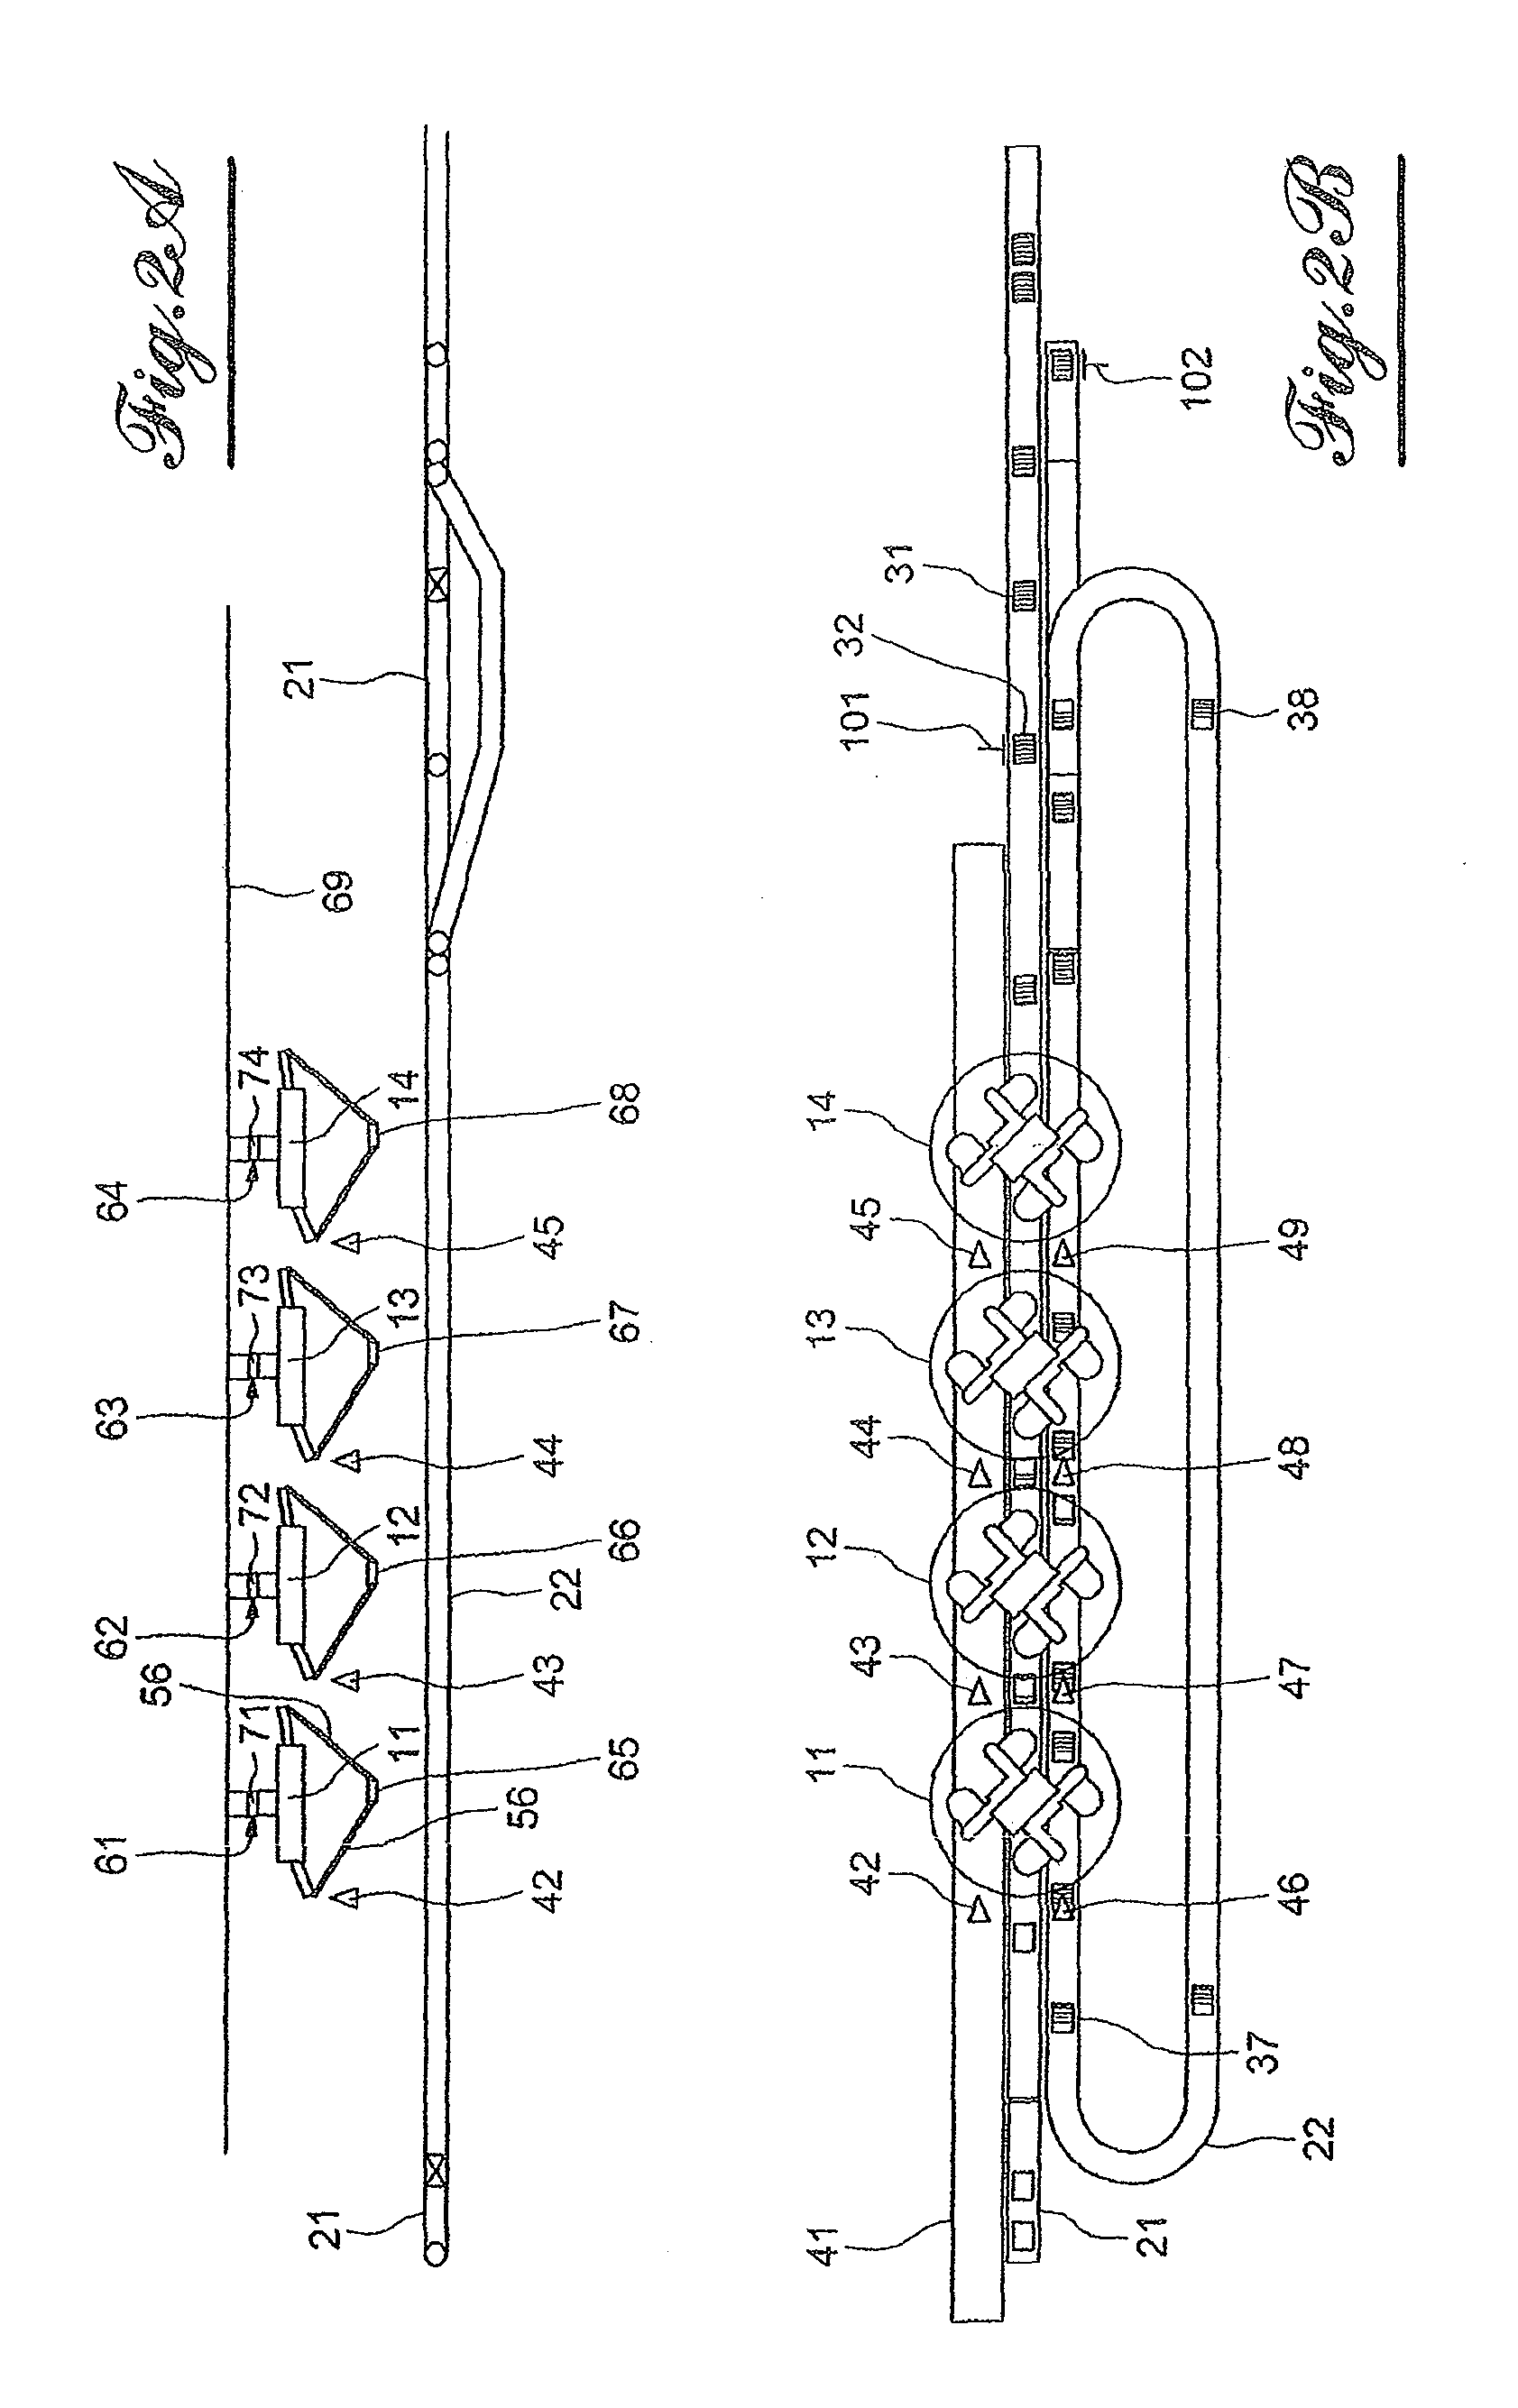 Method of treating objects according to their individual weights